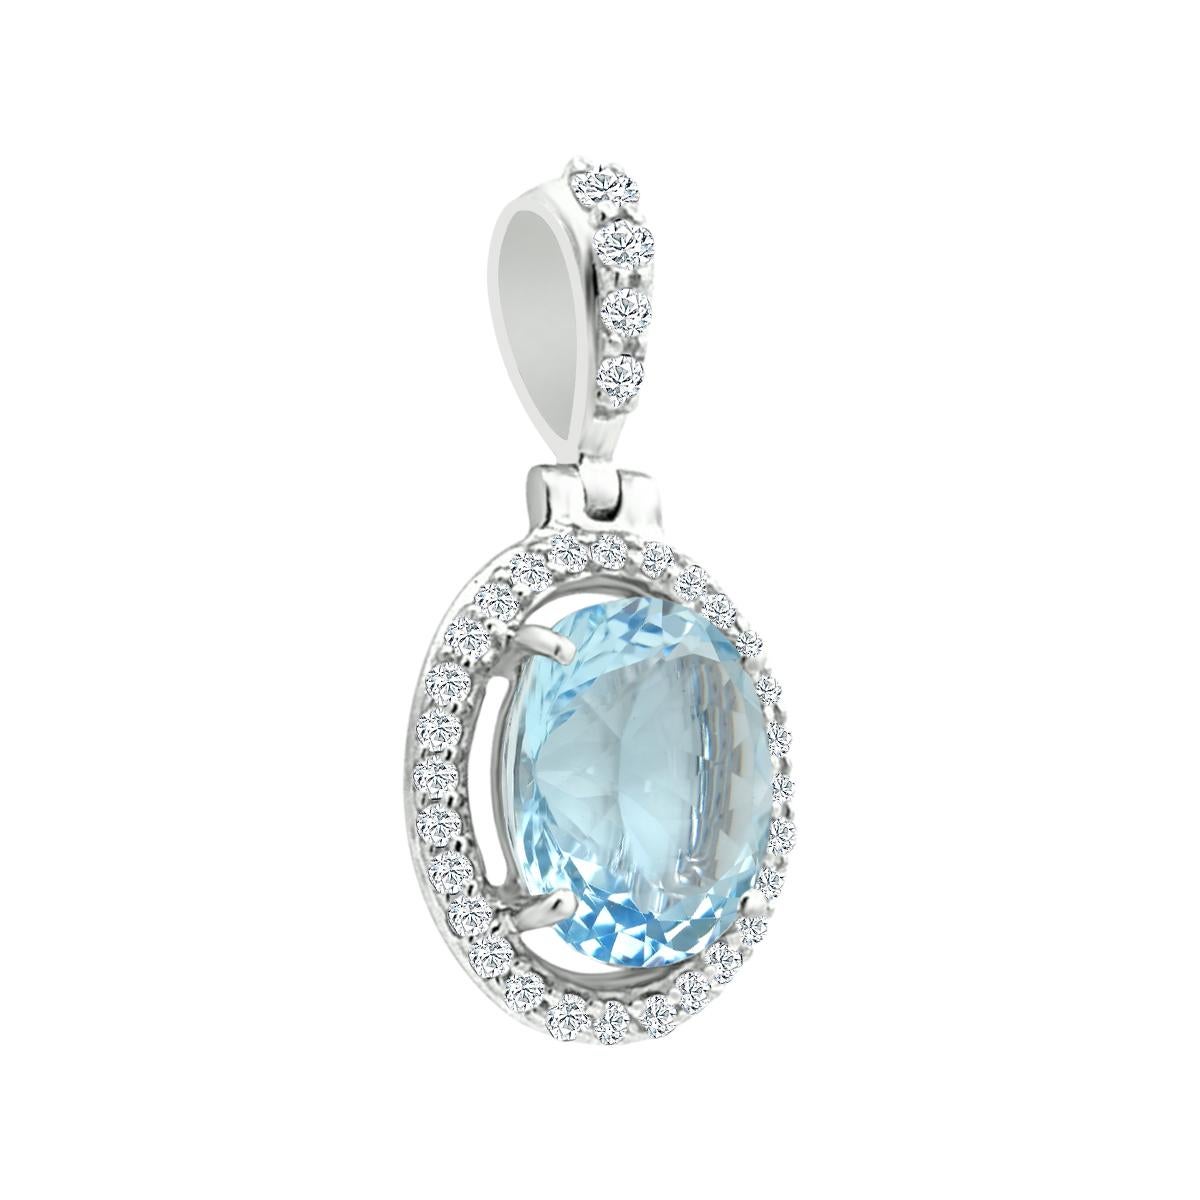 Aquamarine, The Dazzling Blue Birthstone For The Month Of March, Has One Of The Most Unique Hues Amongst Precious Stones.
This Stunning 14K White Gold Oval Shaped Pendant Has It All ! The Perfect Mesmerizing Gemstone And  Beautiful Settings Of